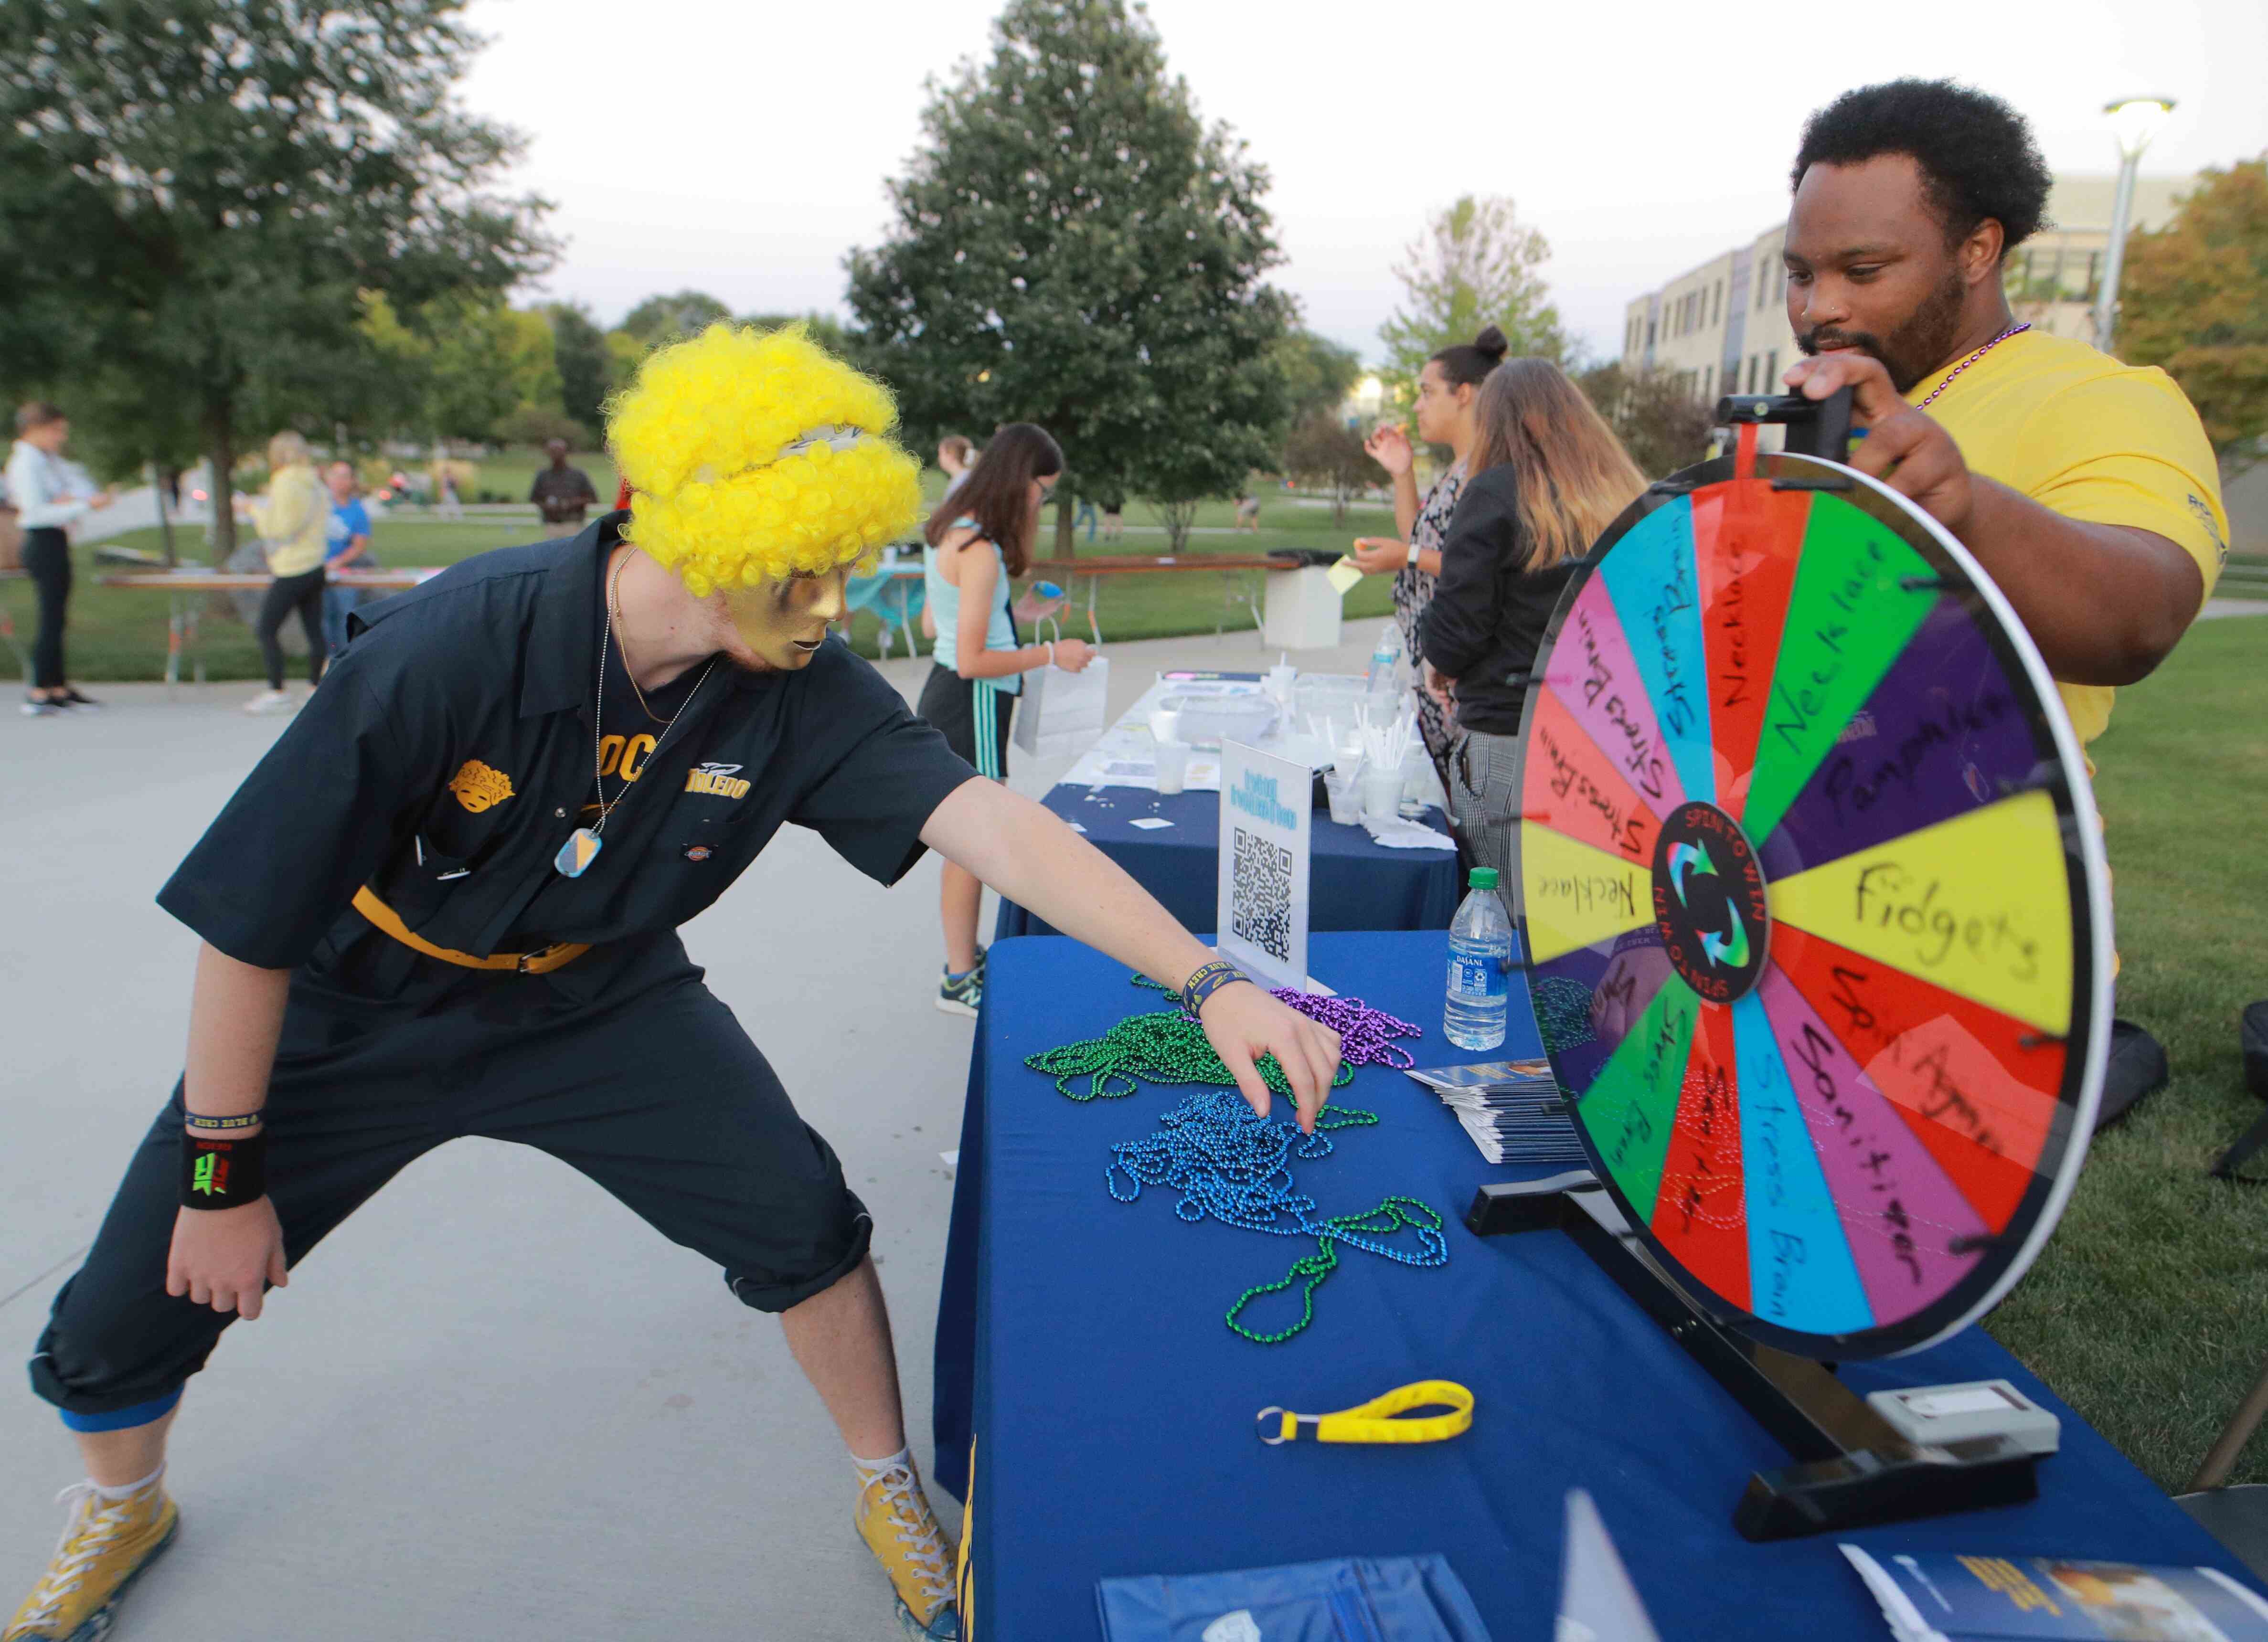 Person dressed in school spirit spinning a prize wheel at an outdoor event.